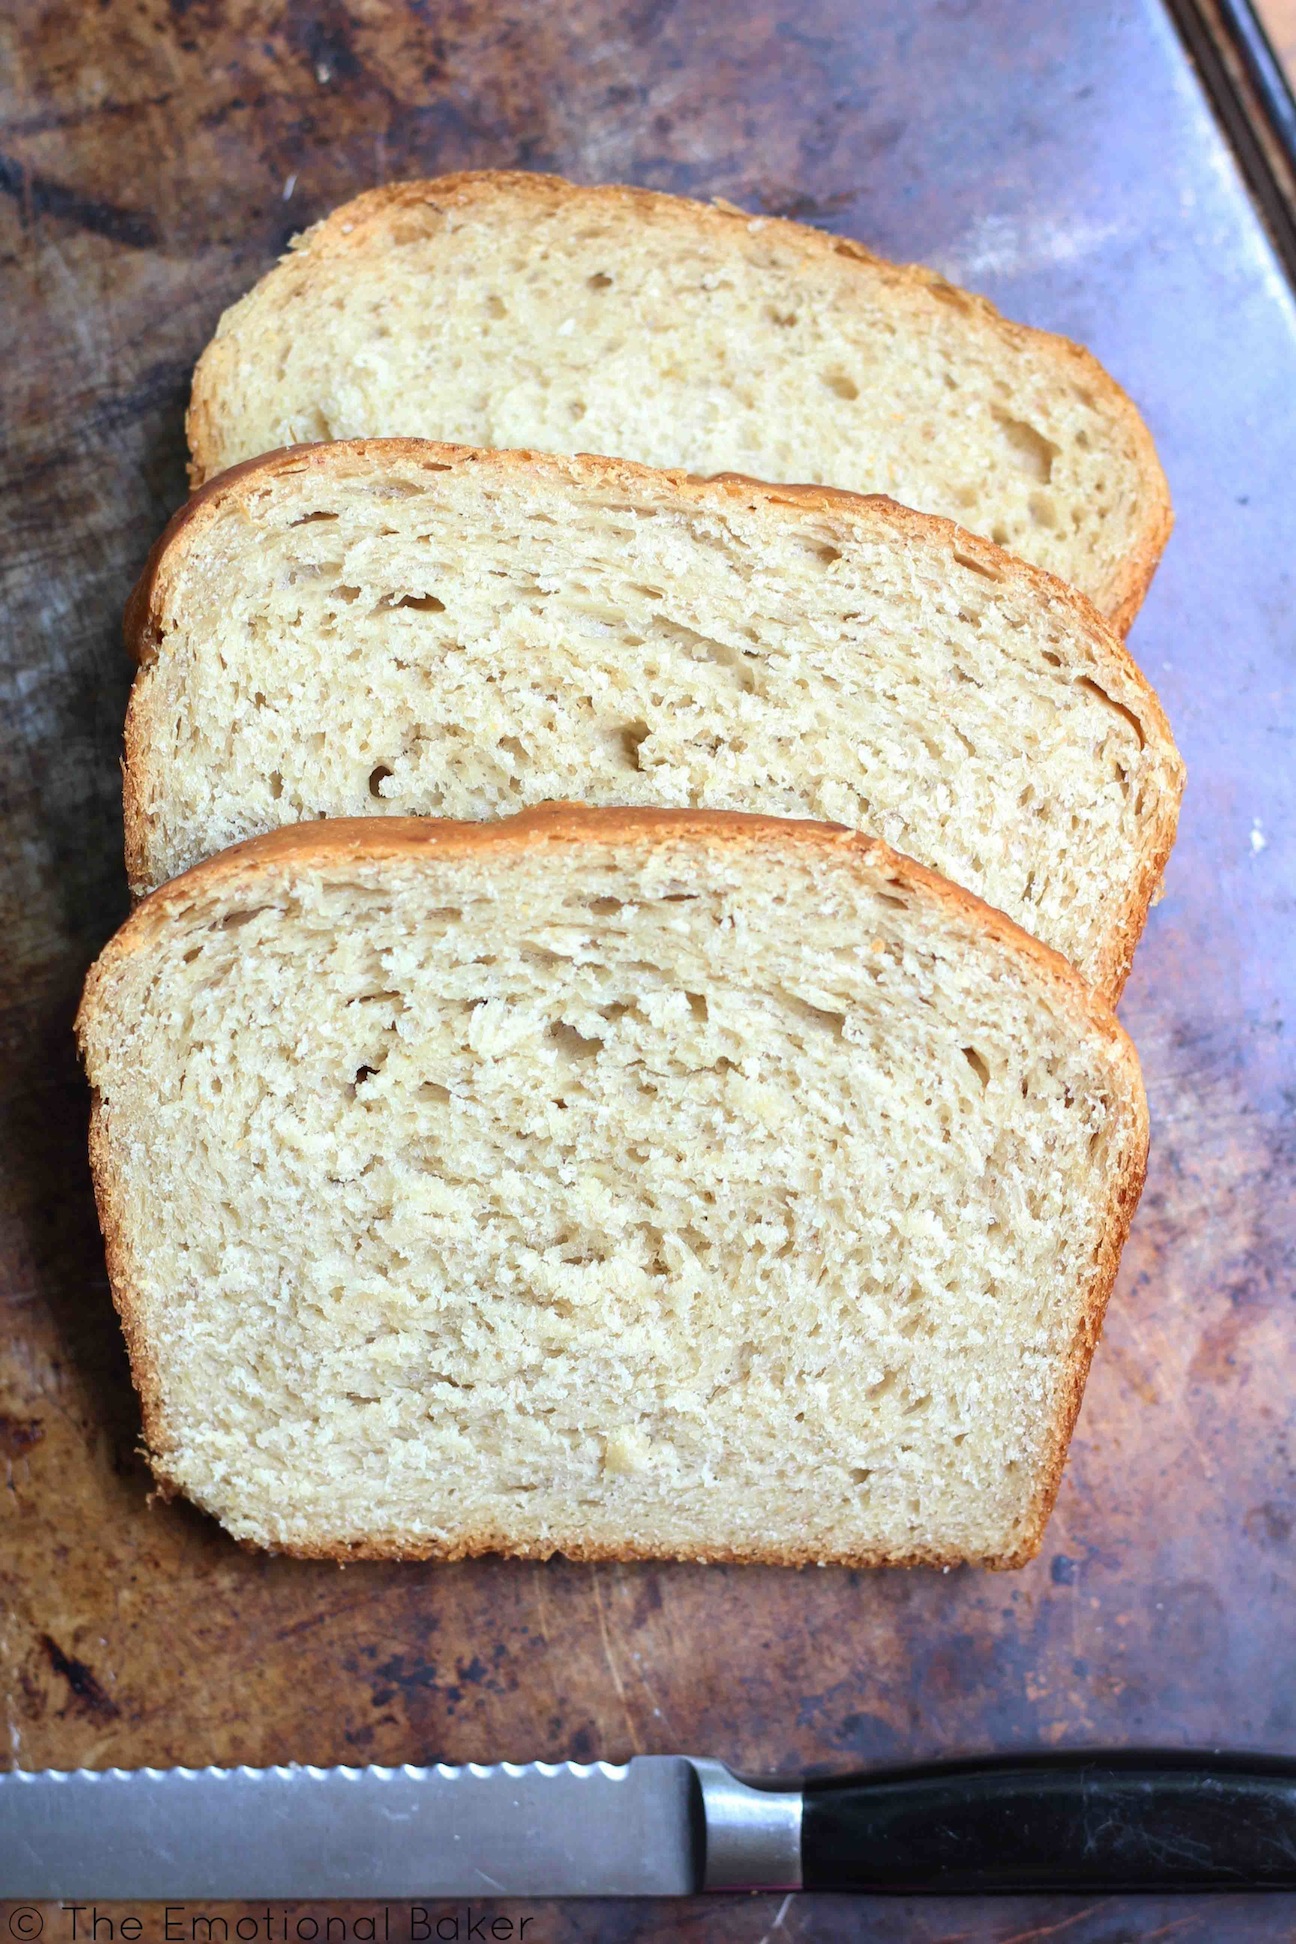 A soft, yeasted bread perfect for sandwiches